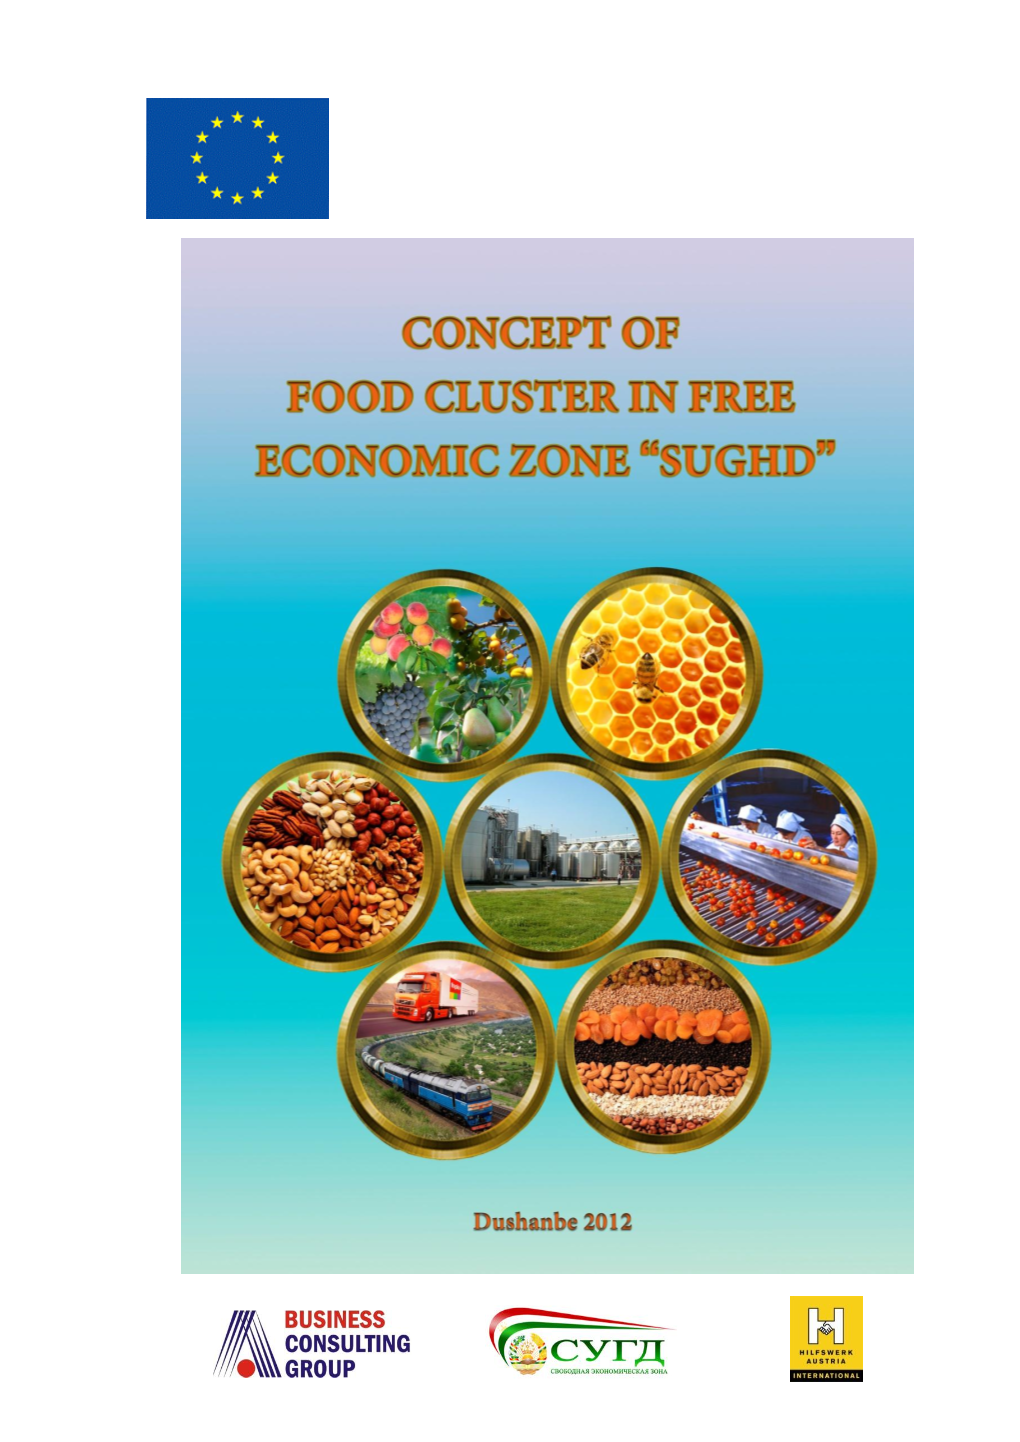 Concept of Food Cluster in Free Economic Zone “Sughd”